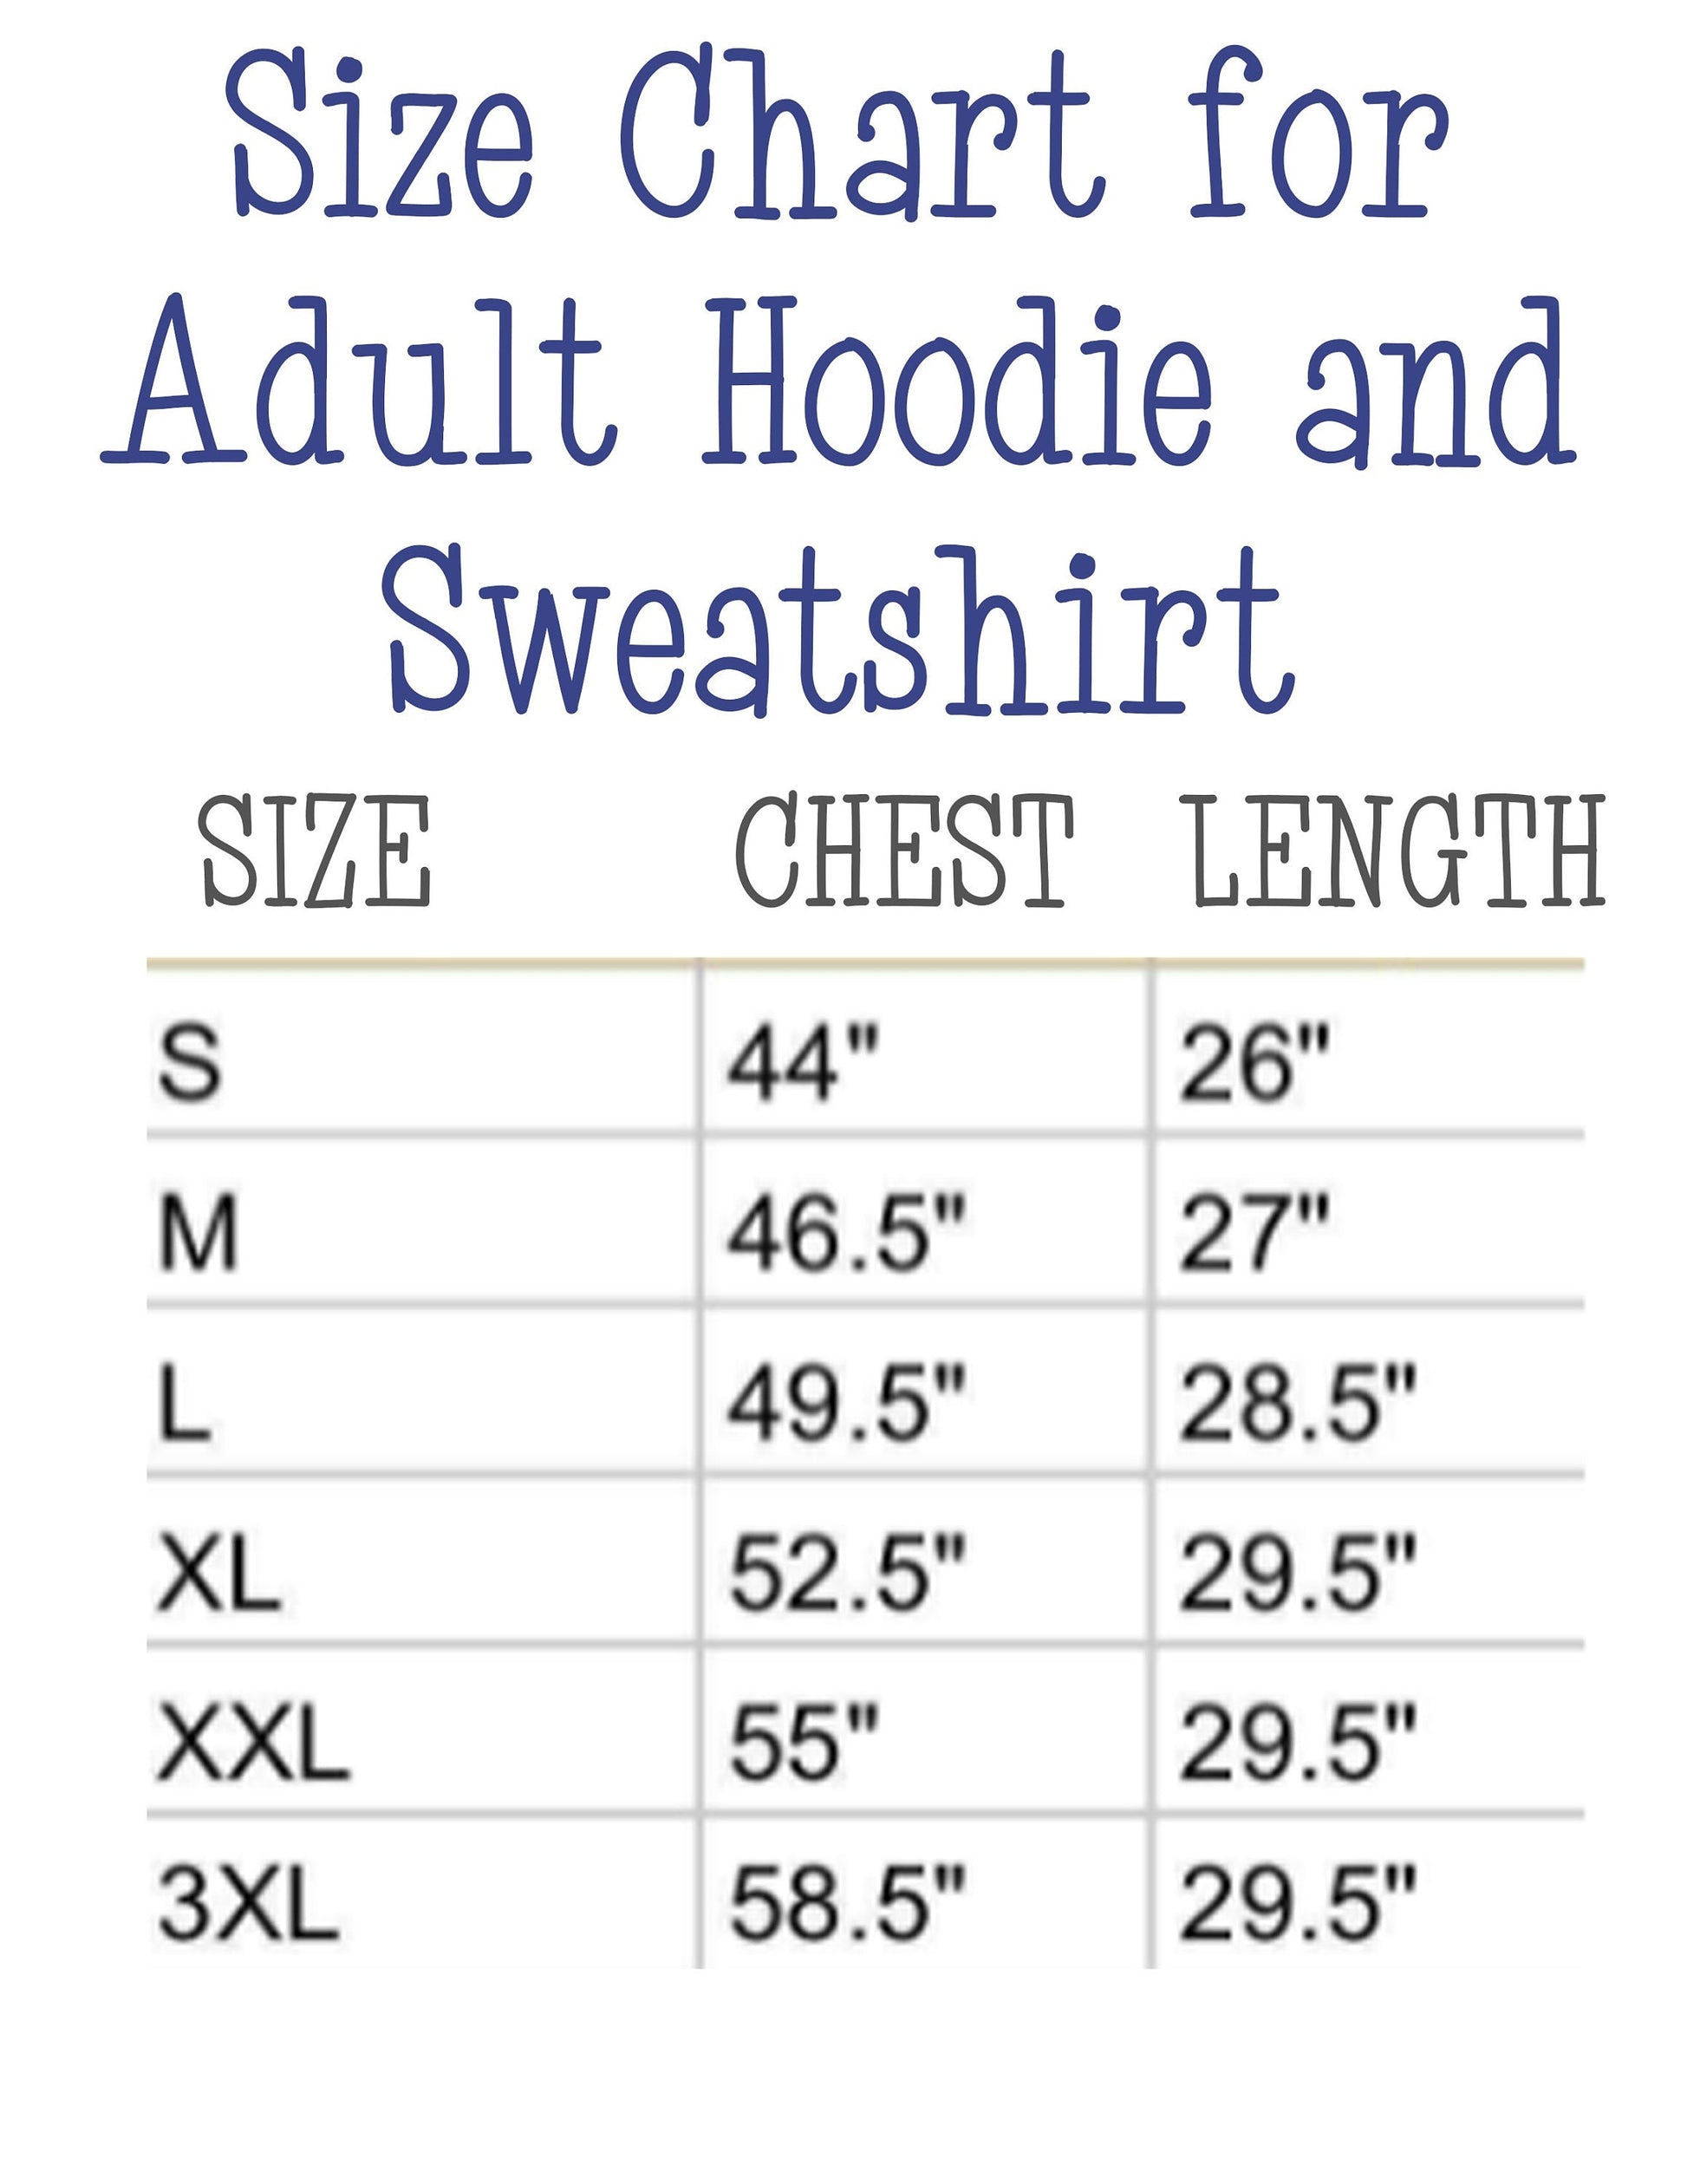 Sublimation Hoodies 100% Polyester Blank Thick Fleece Lined, Extremely Soft Kids and Adult Sizes